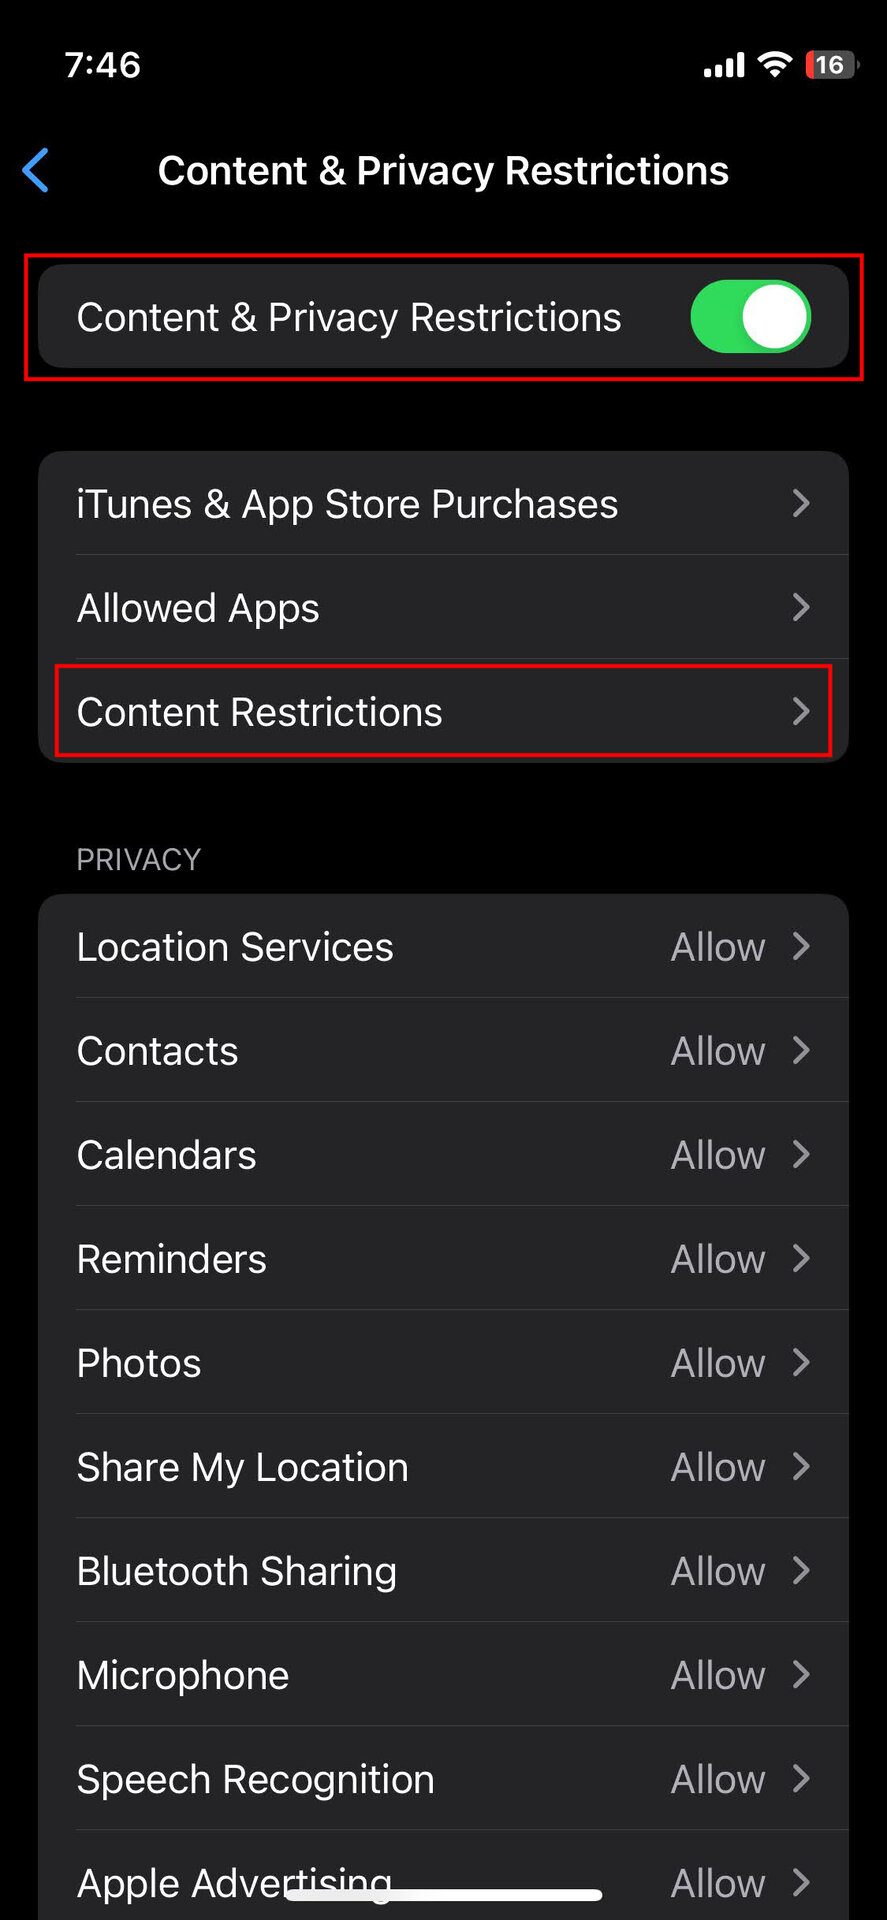 How to block iPhone apps by using Content Restrictions (3)